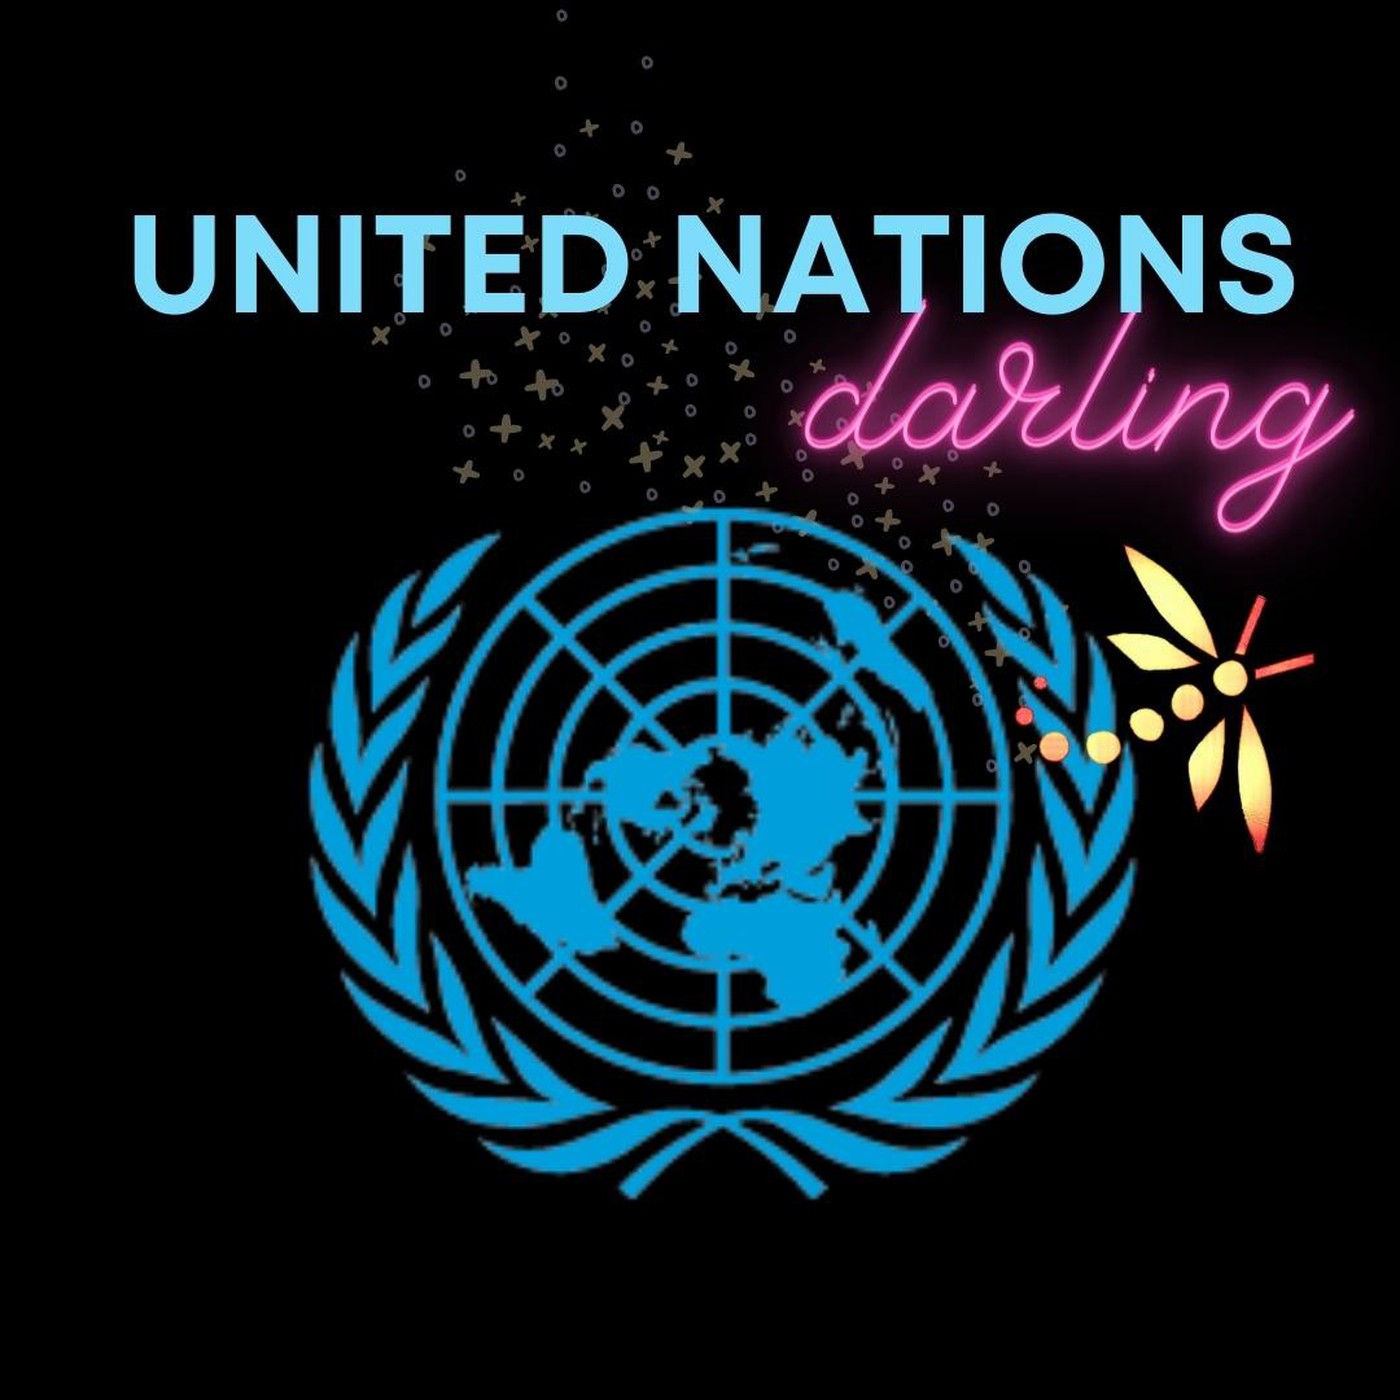 Welcome to the United Nations, darling.